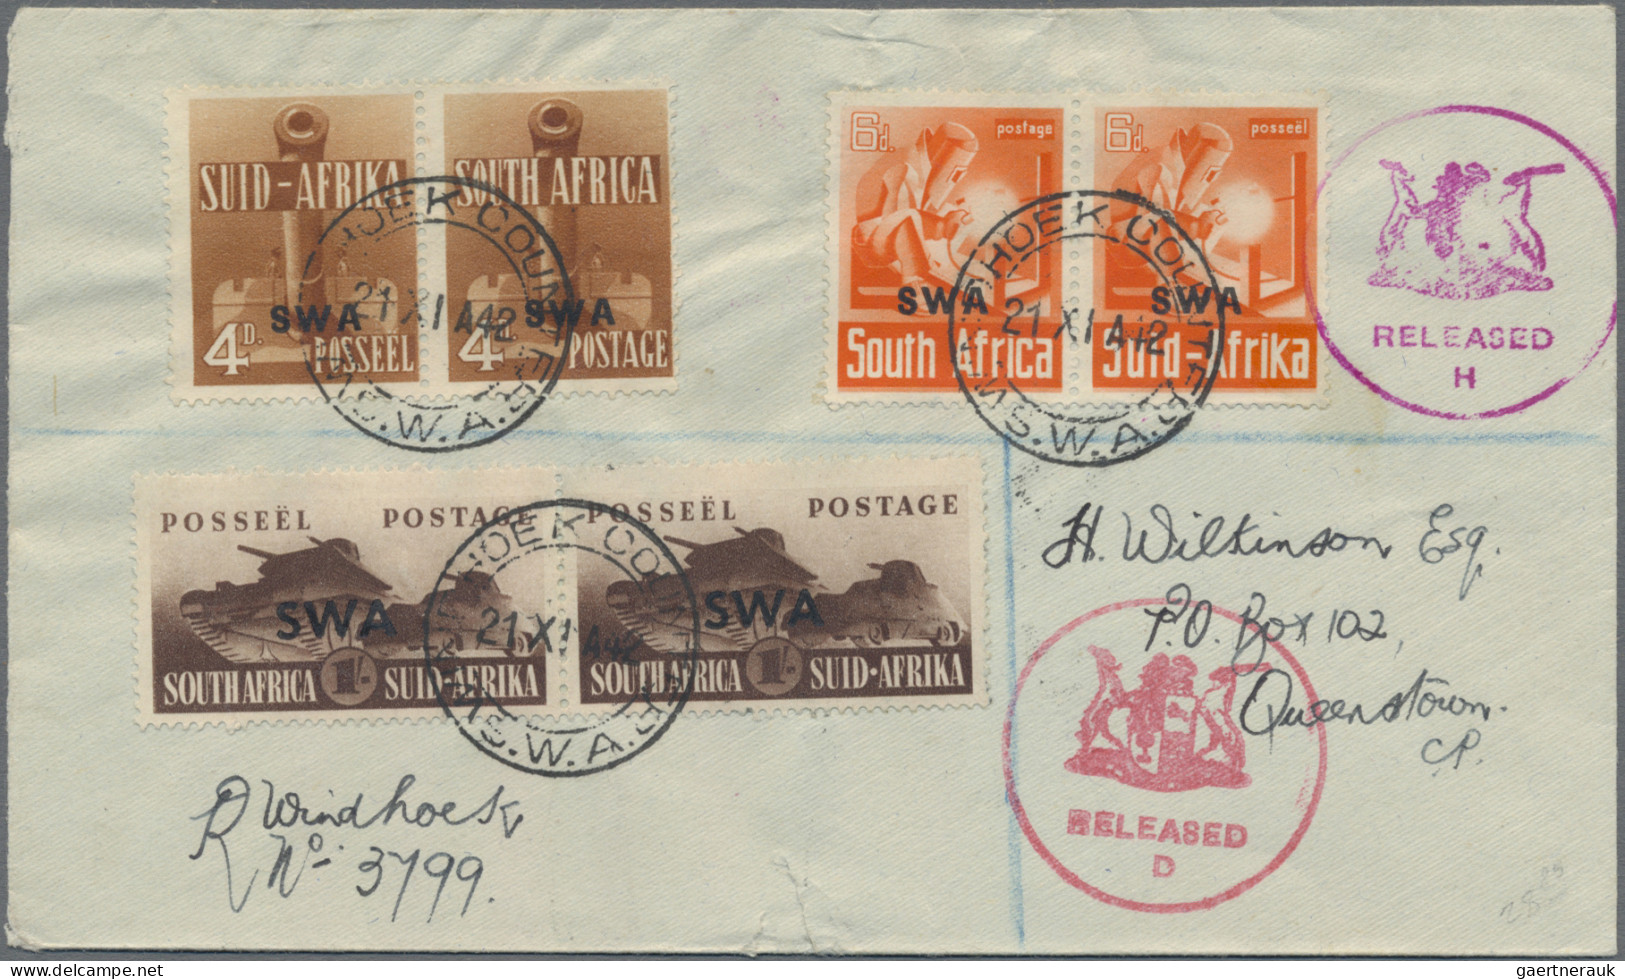 World Wide: 1900's-modern: About 380 covers, postcards, FDCs, picture postcards